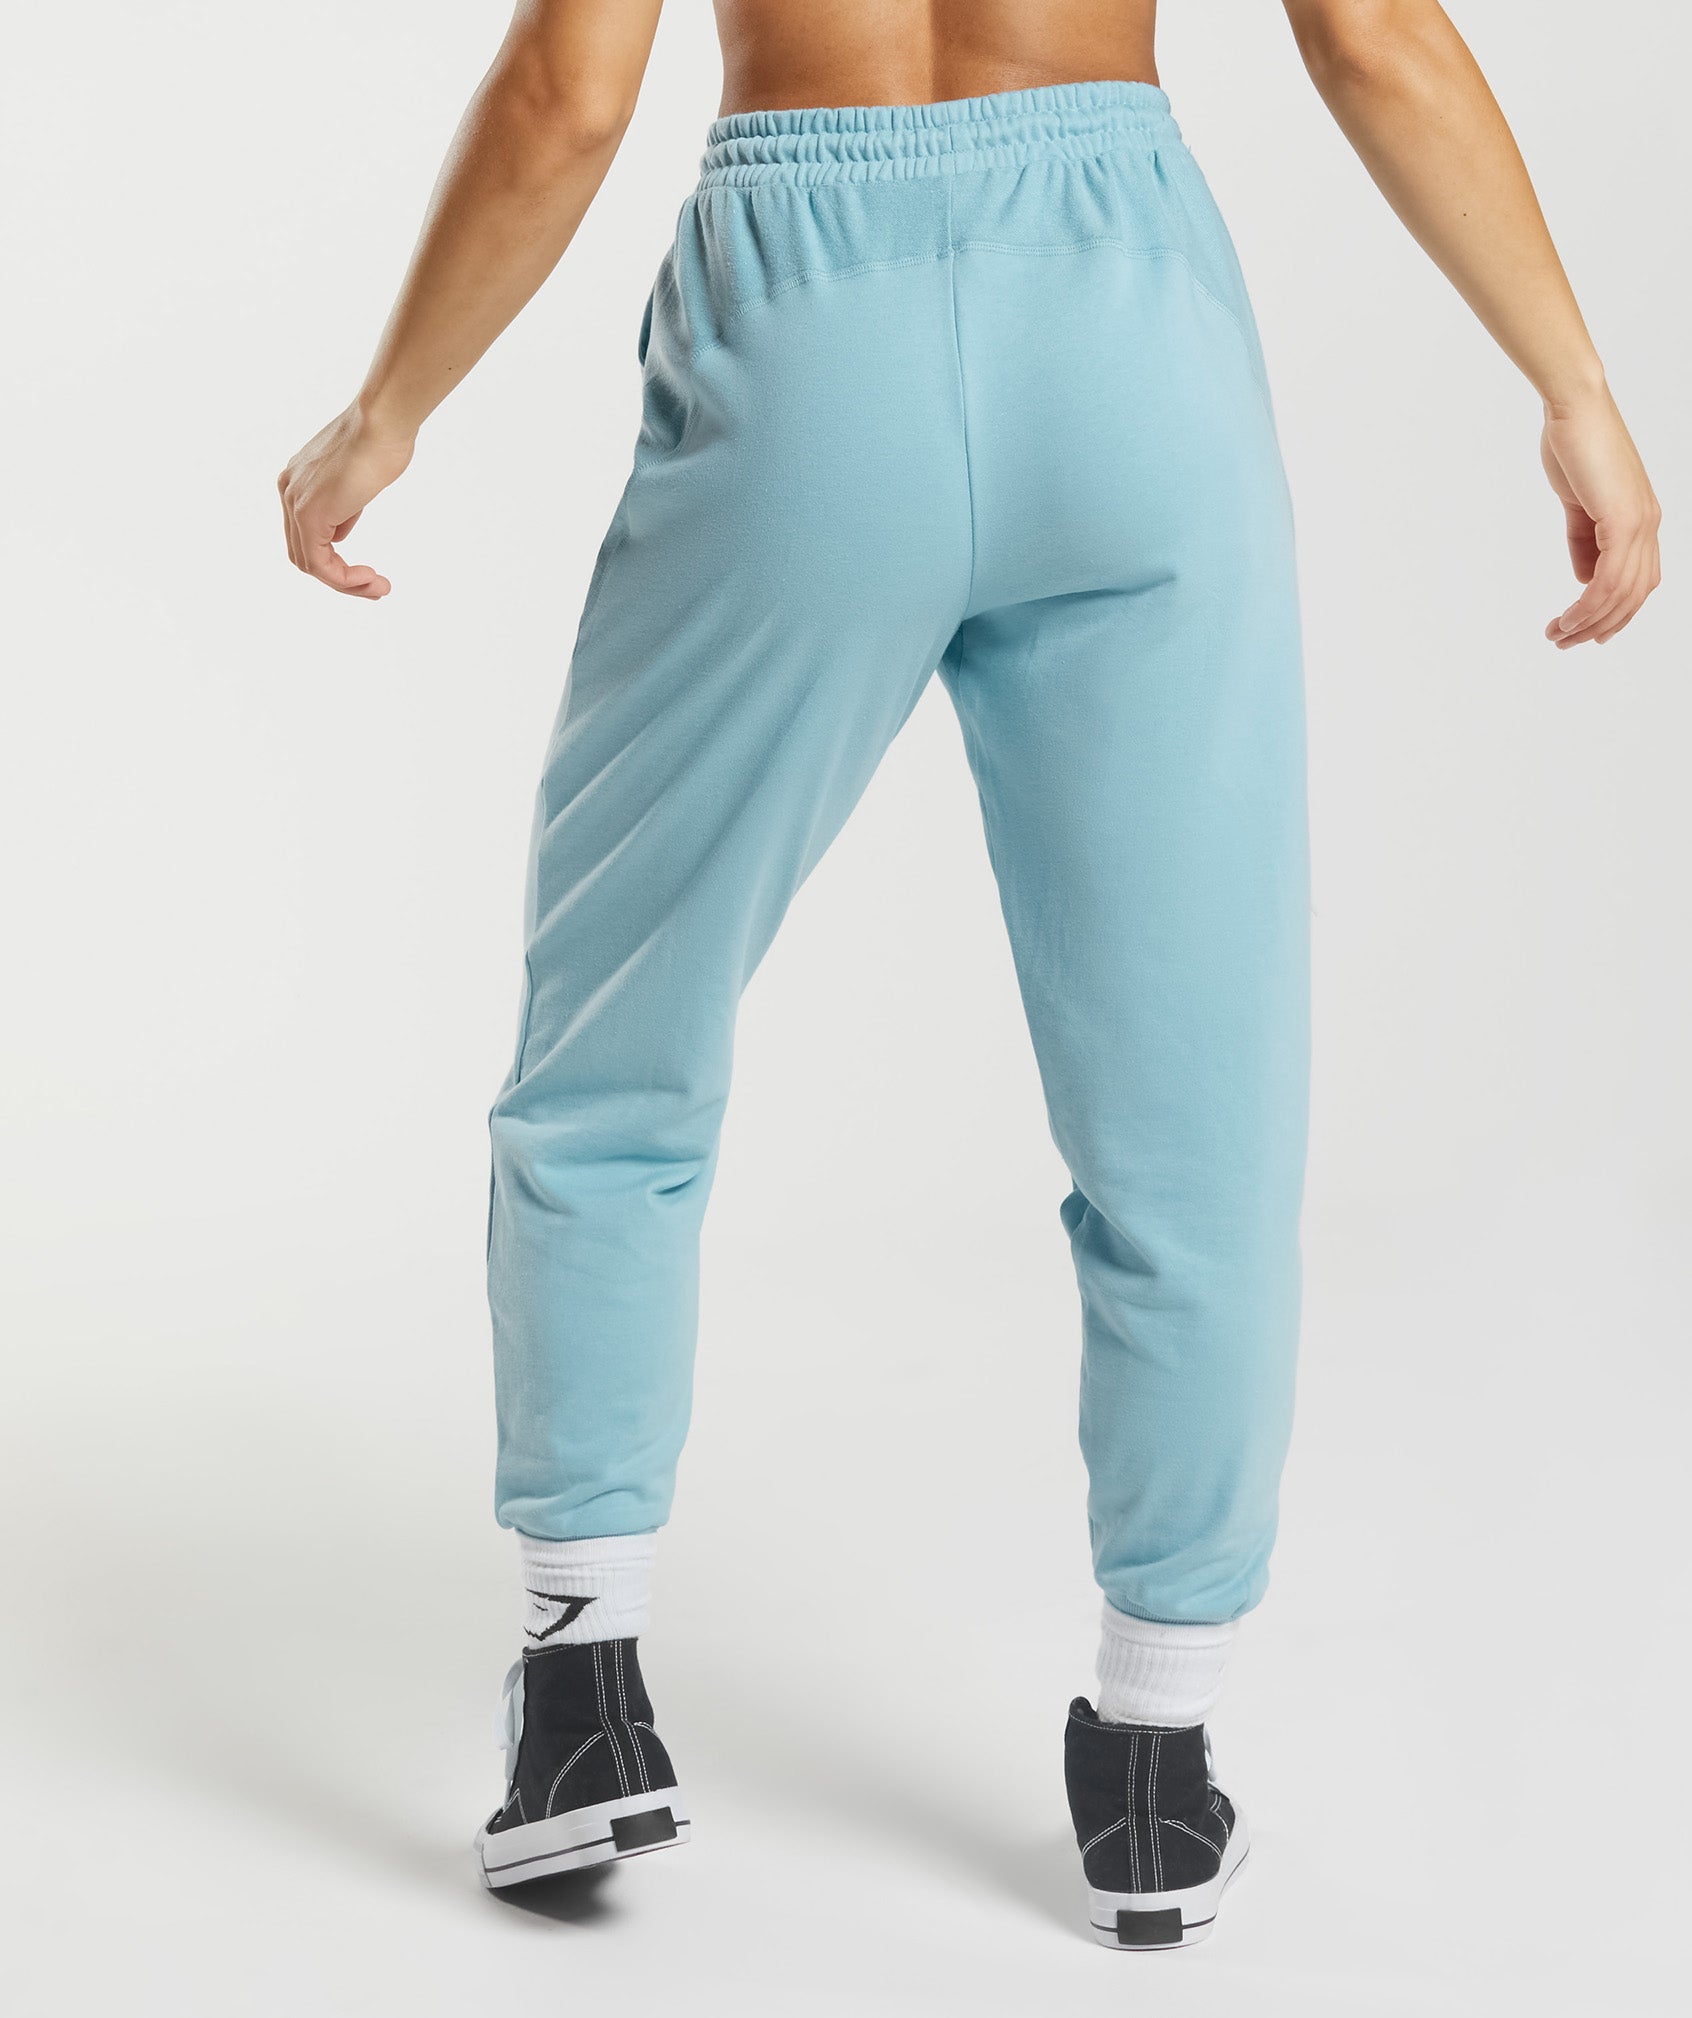 GS Power Joggers in Iceberg Blue - view 2